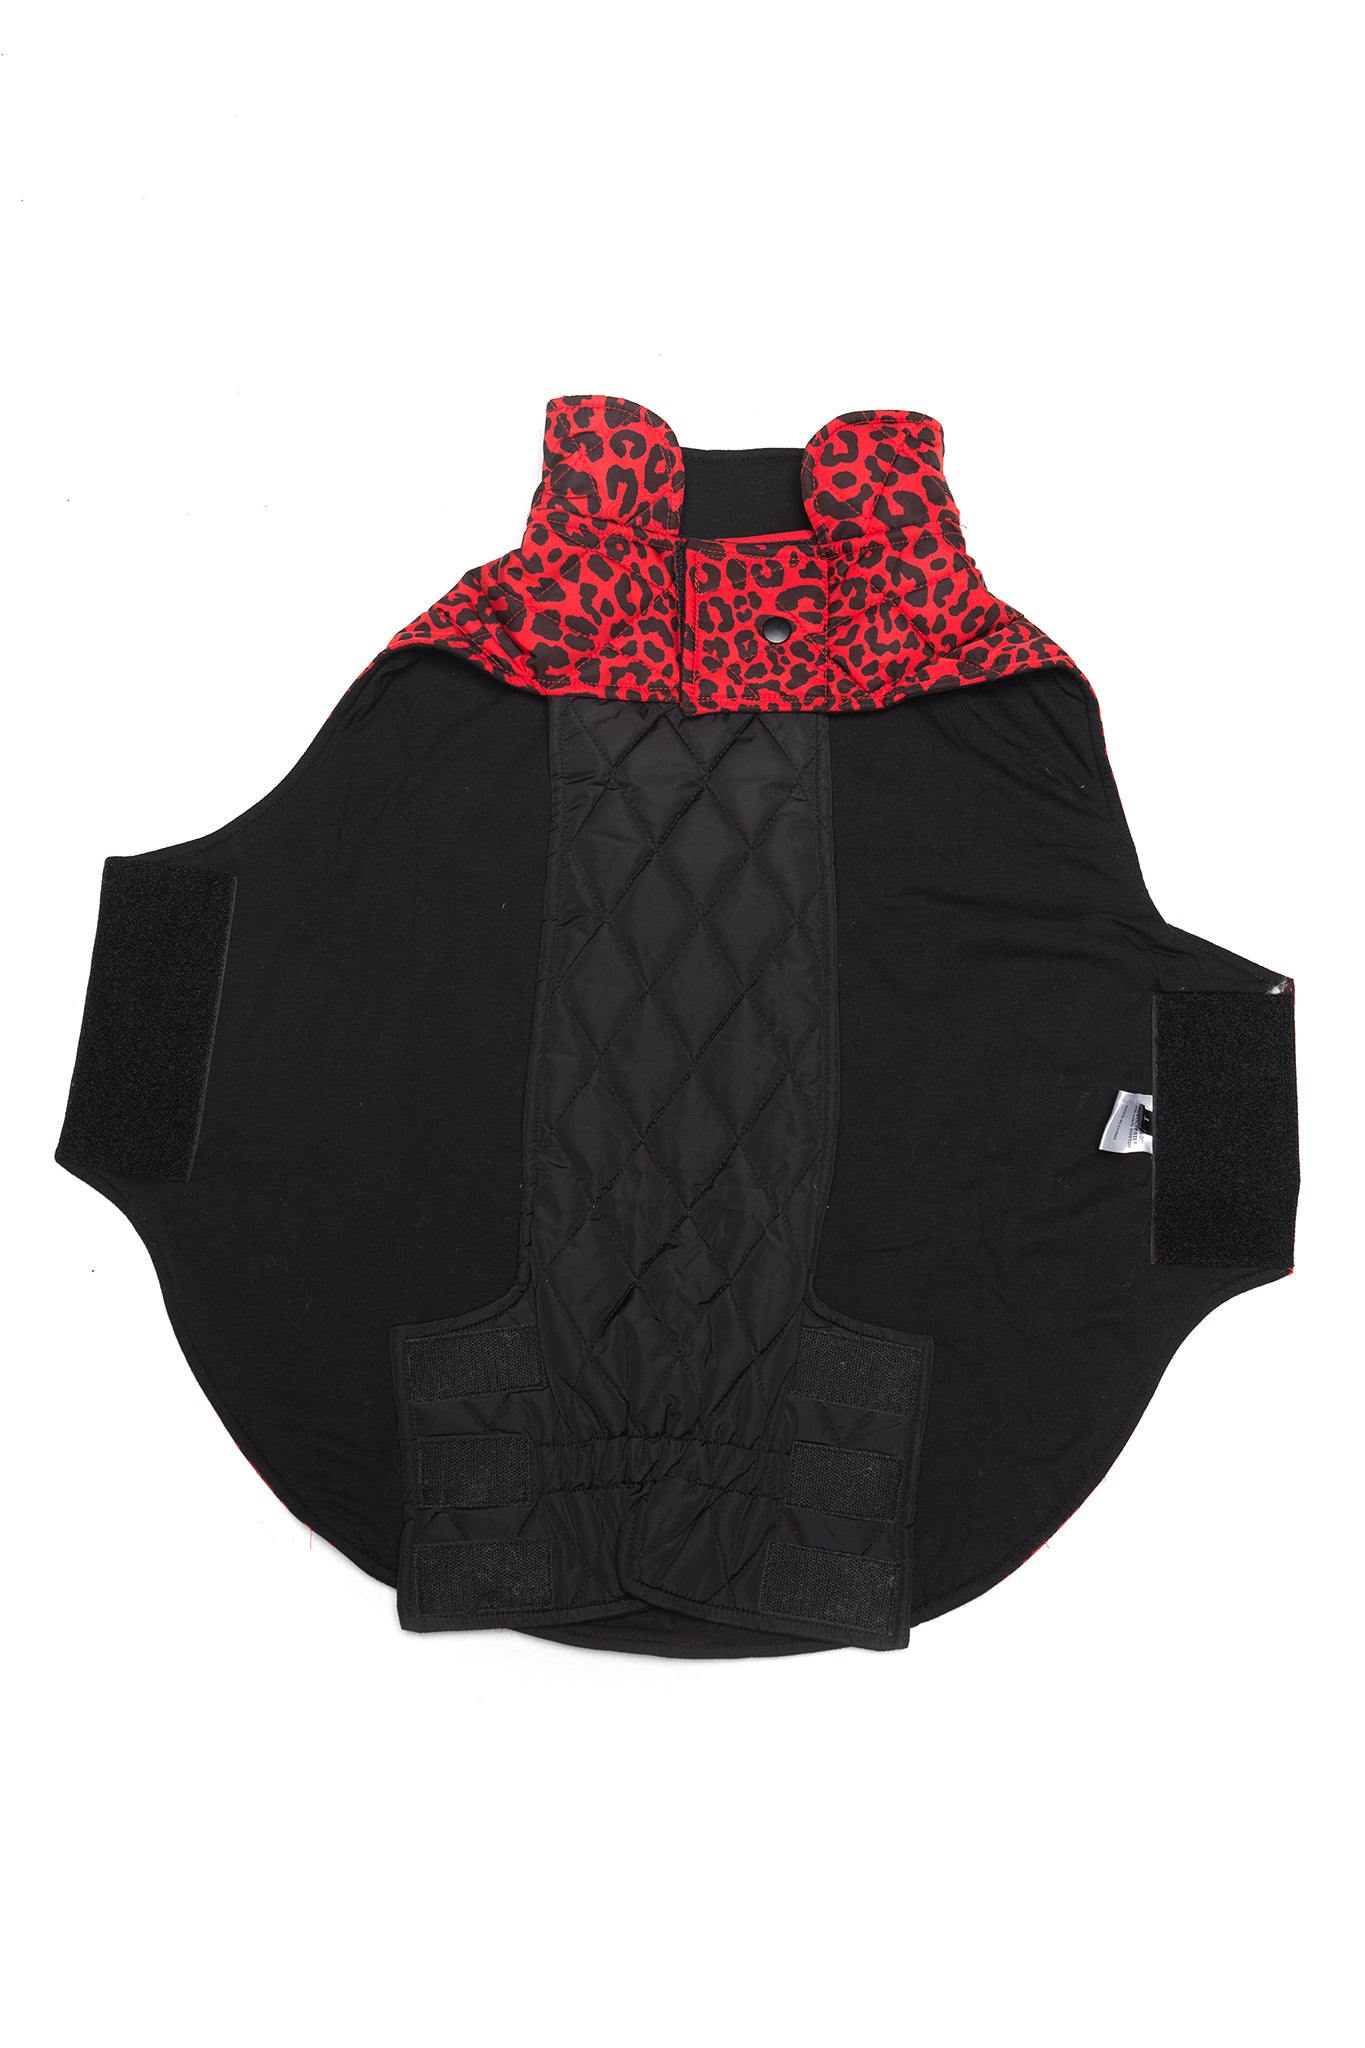 Animal Instinct Dog Jacket in Racy Red laid on floor to show the interior view of the jacket.